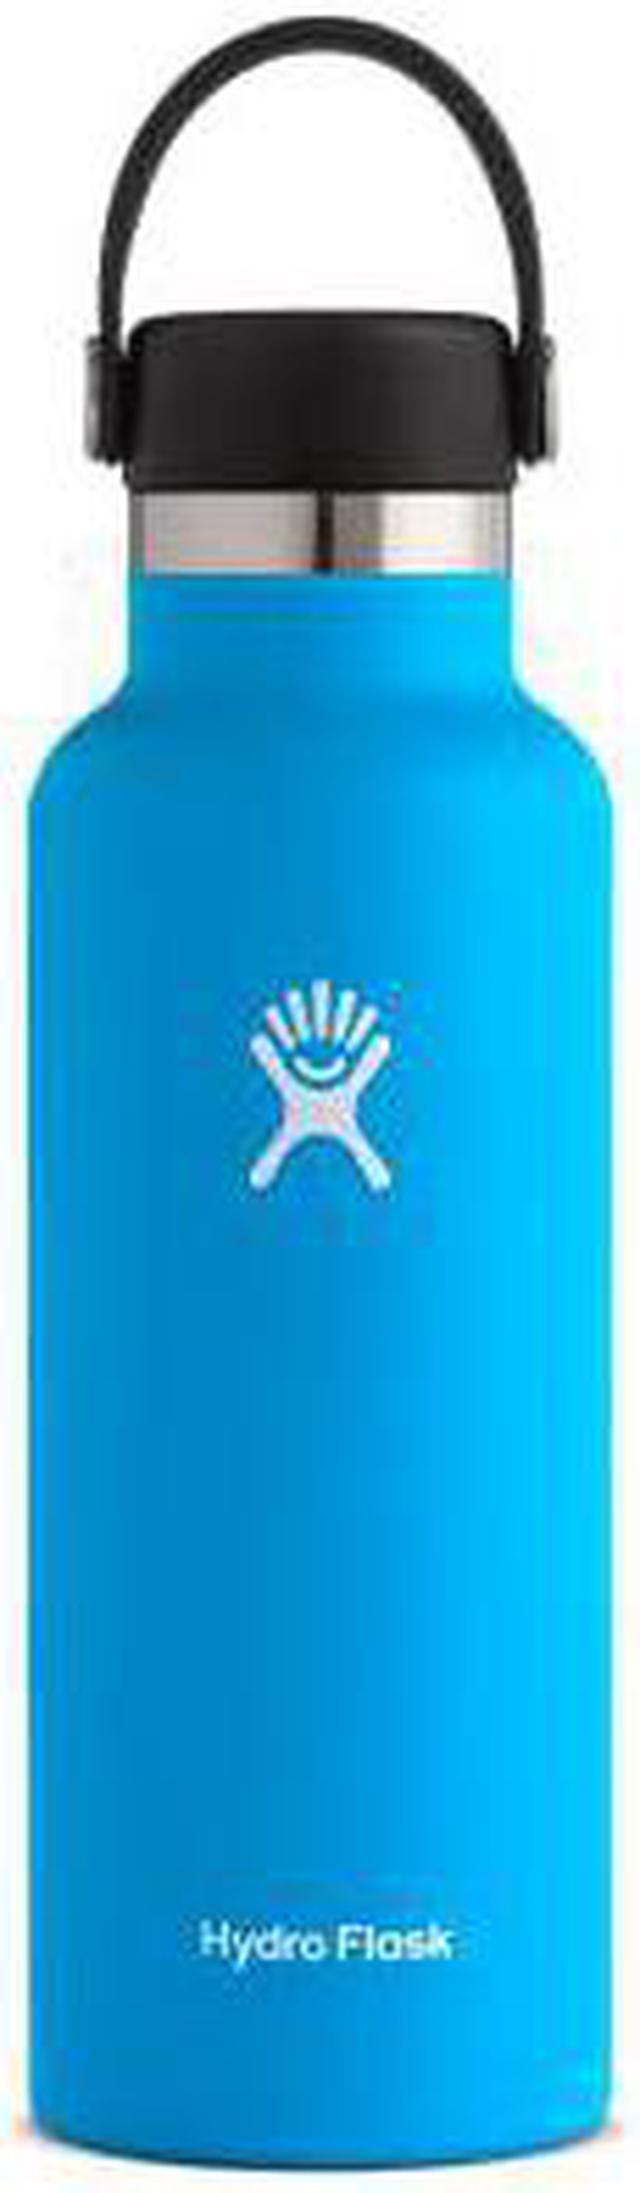  Hydro Flask 18 oz. Water Bottle - Stainless Steel, Reusable,  Vacuum Insulated with Standard Mouth Flex Lid : Everything Else